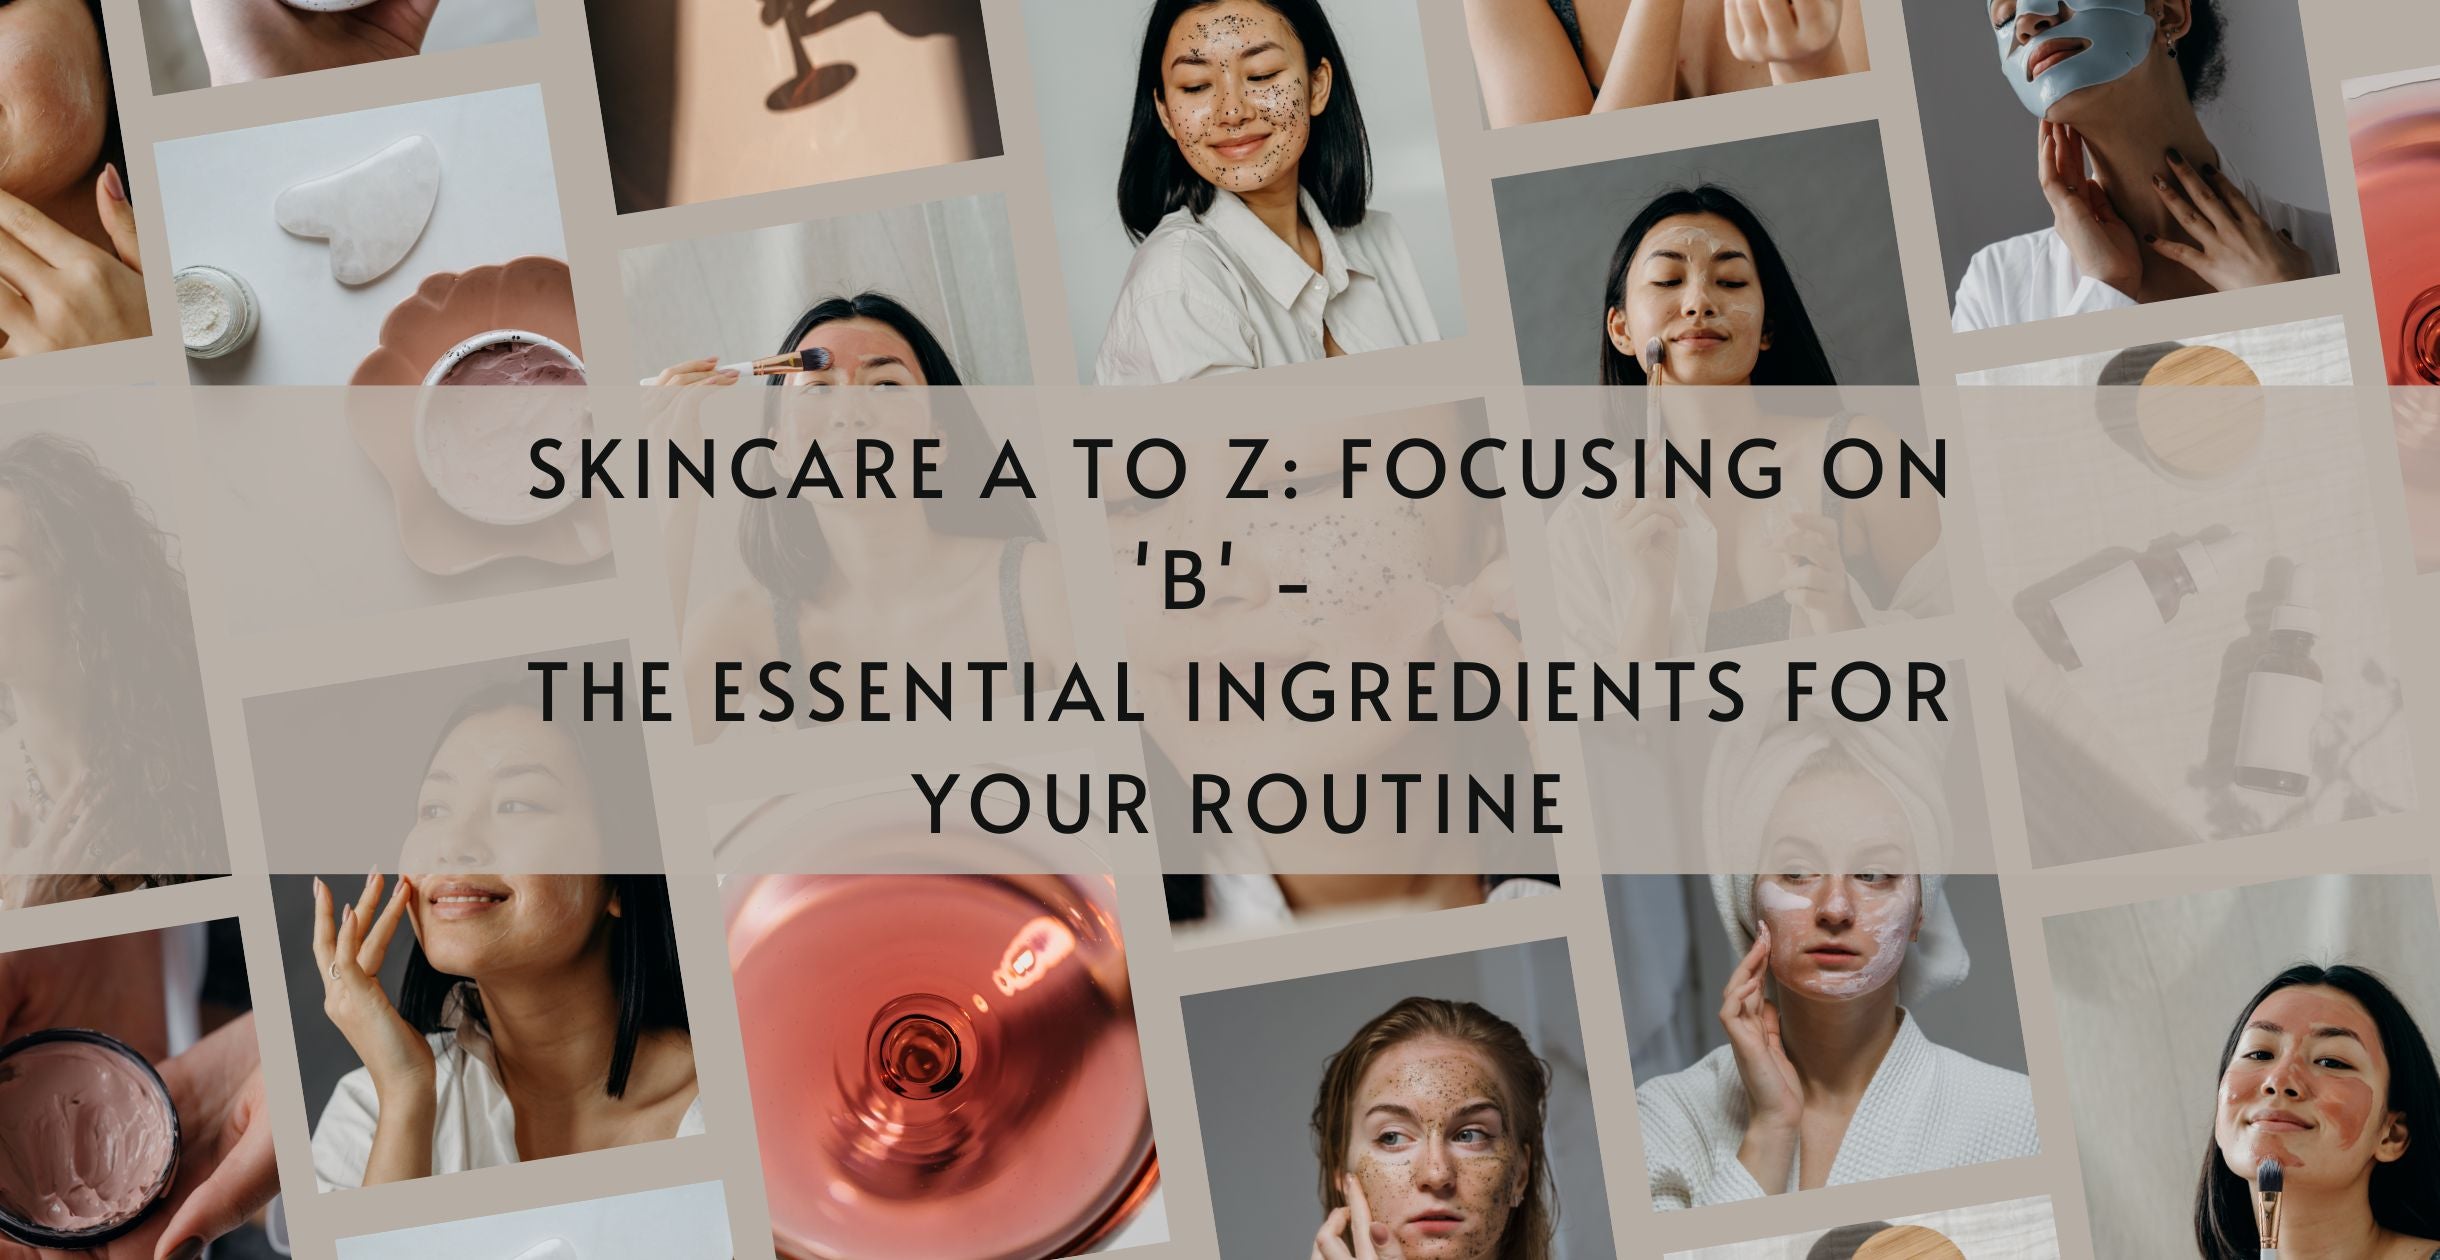 Skincare A to Z: Focusing on 'B' - The Essential Ingredients for Your Routine